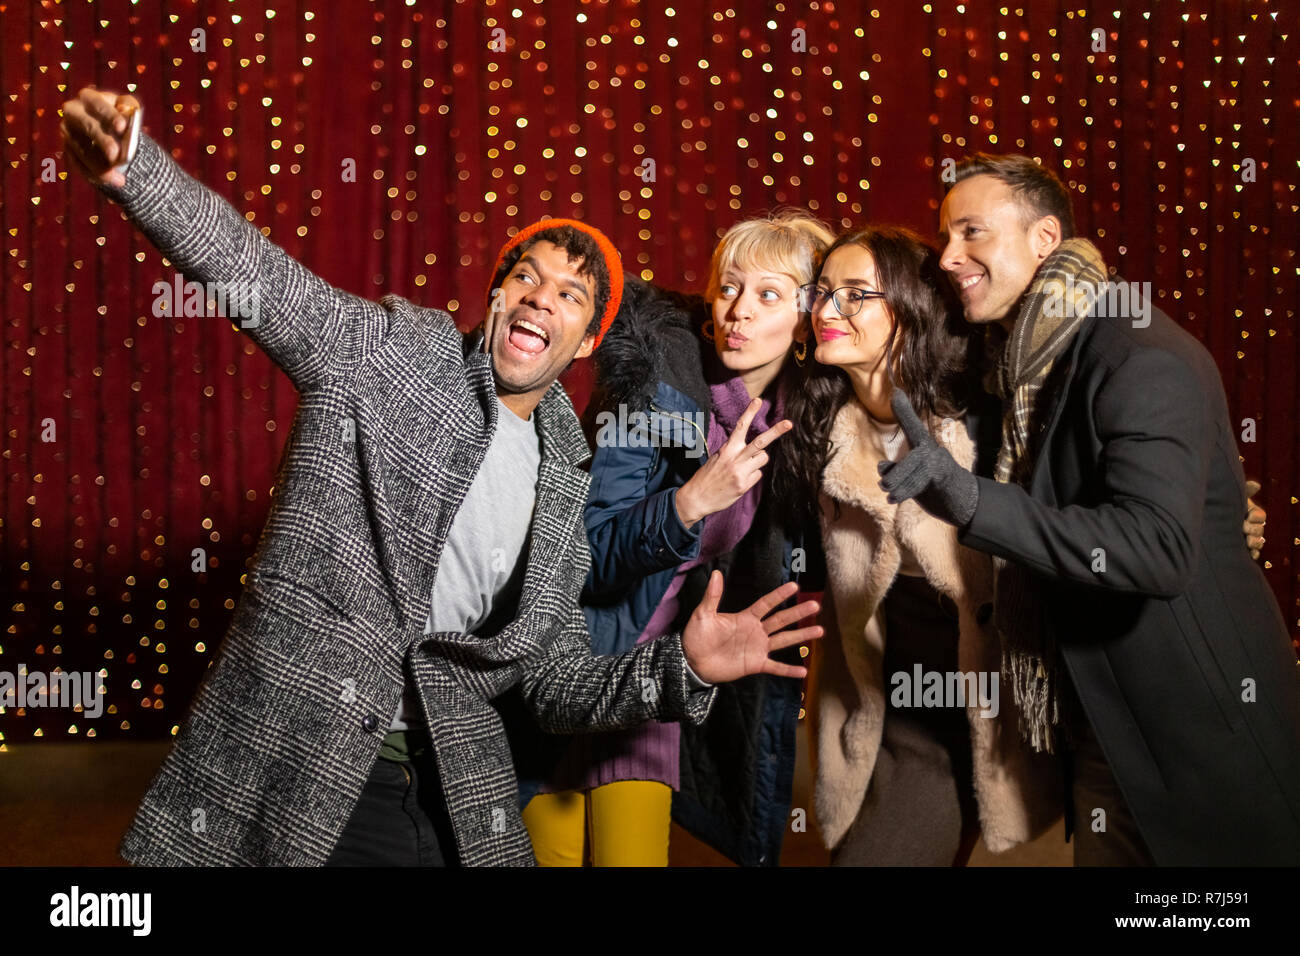 Group of friends taking funny selfie in front of light wall at Christmas market. Stock Photo